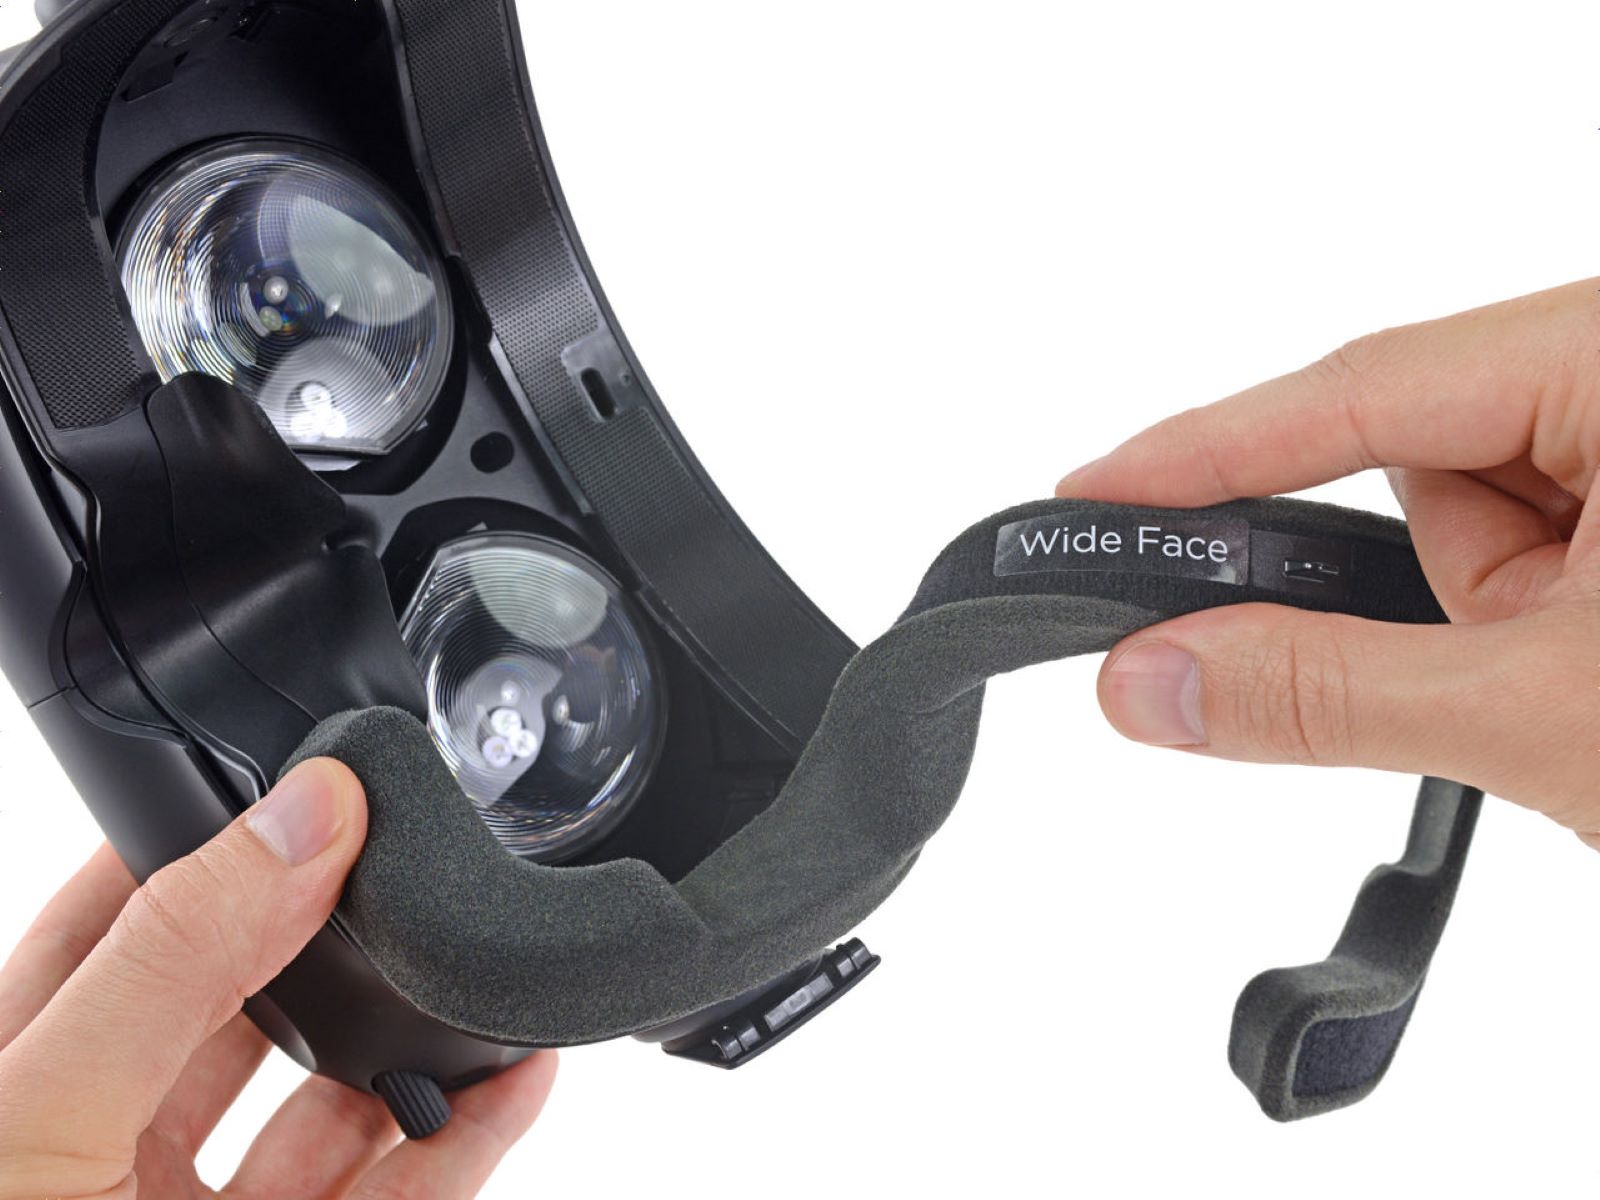 HTC Vive: How To Replace The Face Foam